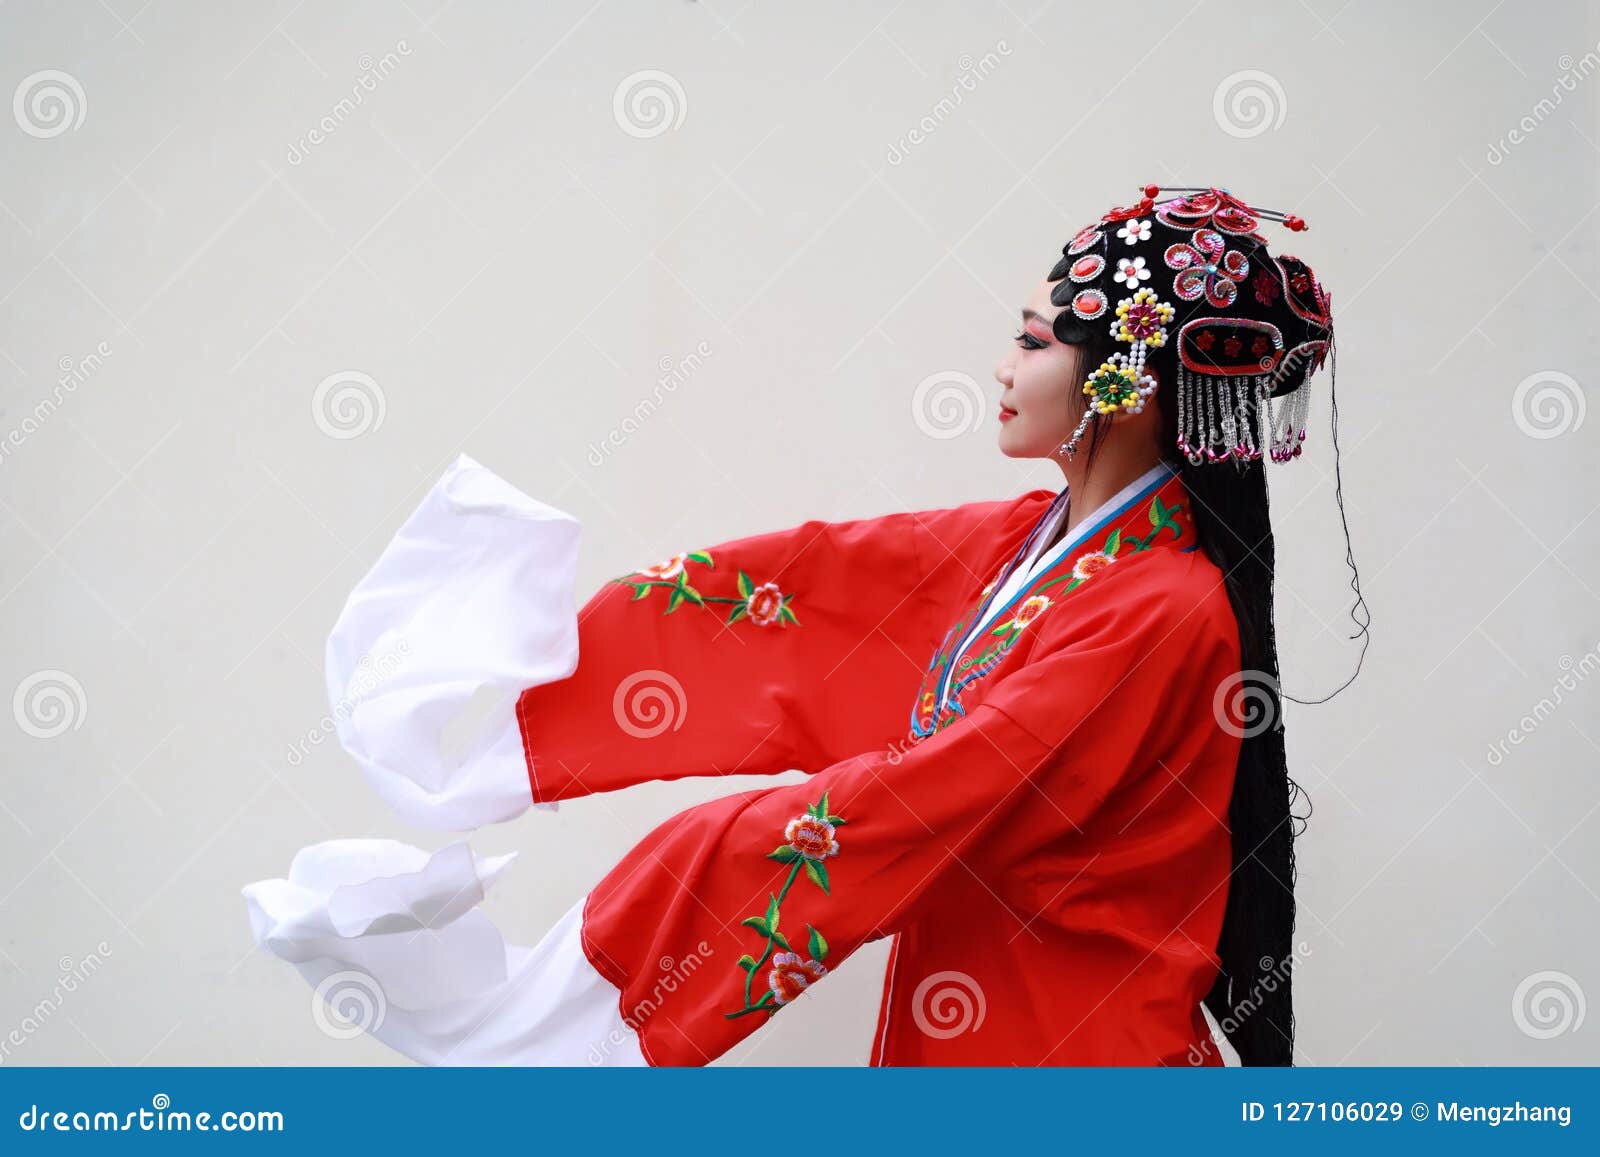 traditional role of women in china